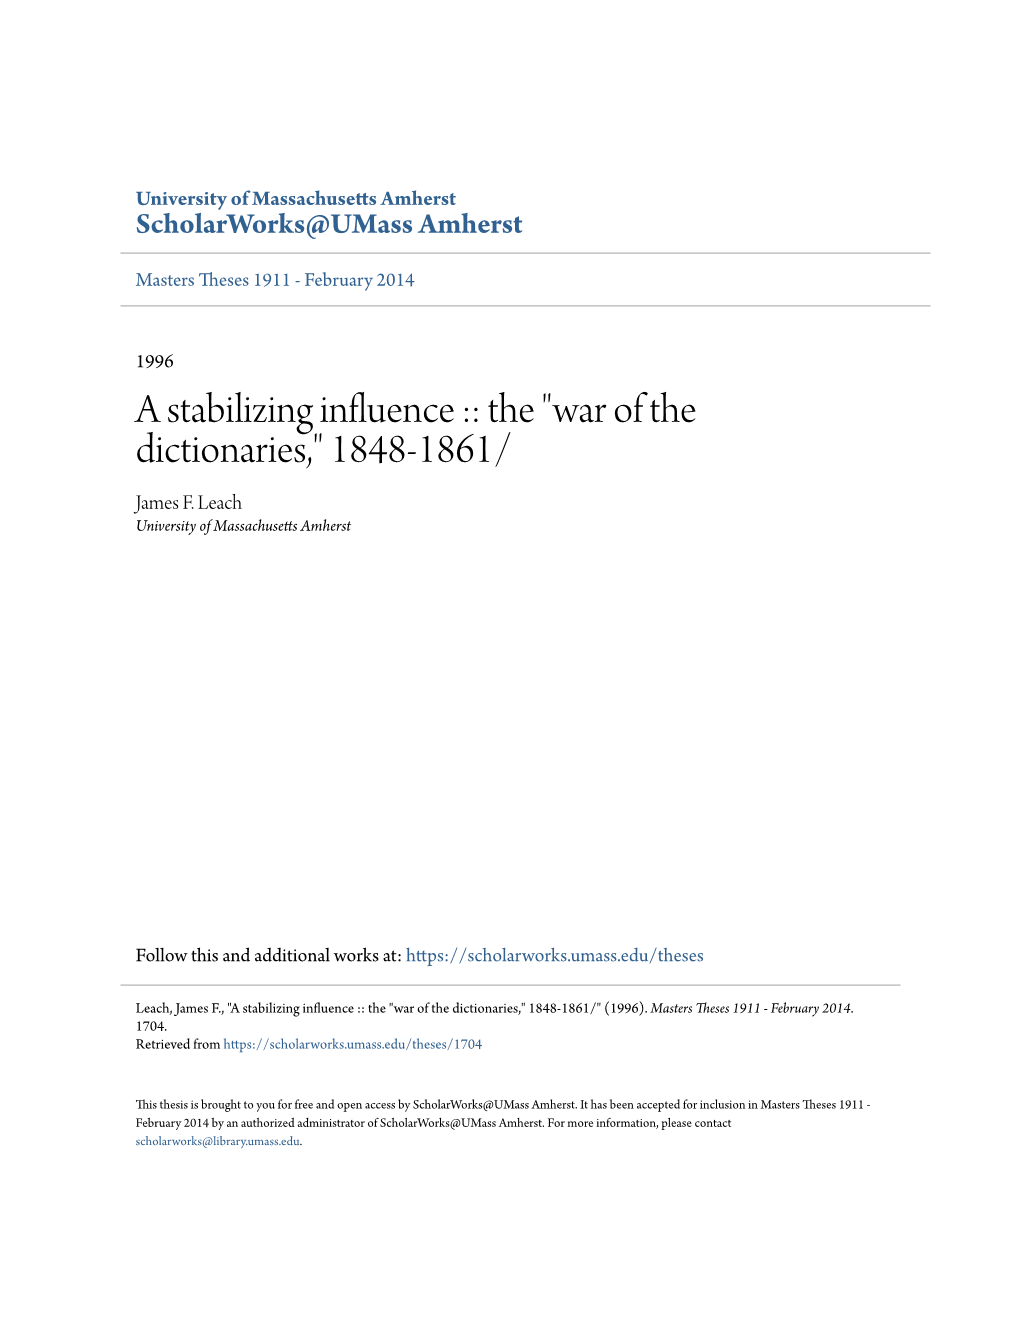 A Stabilizing Influence :: the "War of the Dictionaries," 1848-1861/ James F